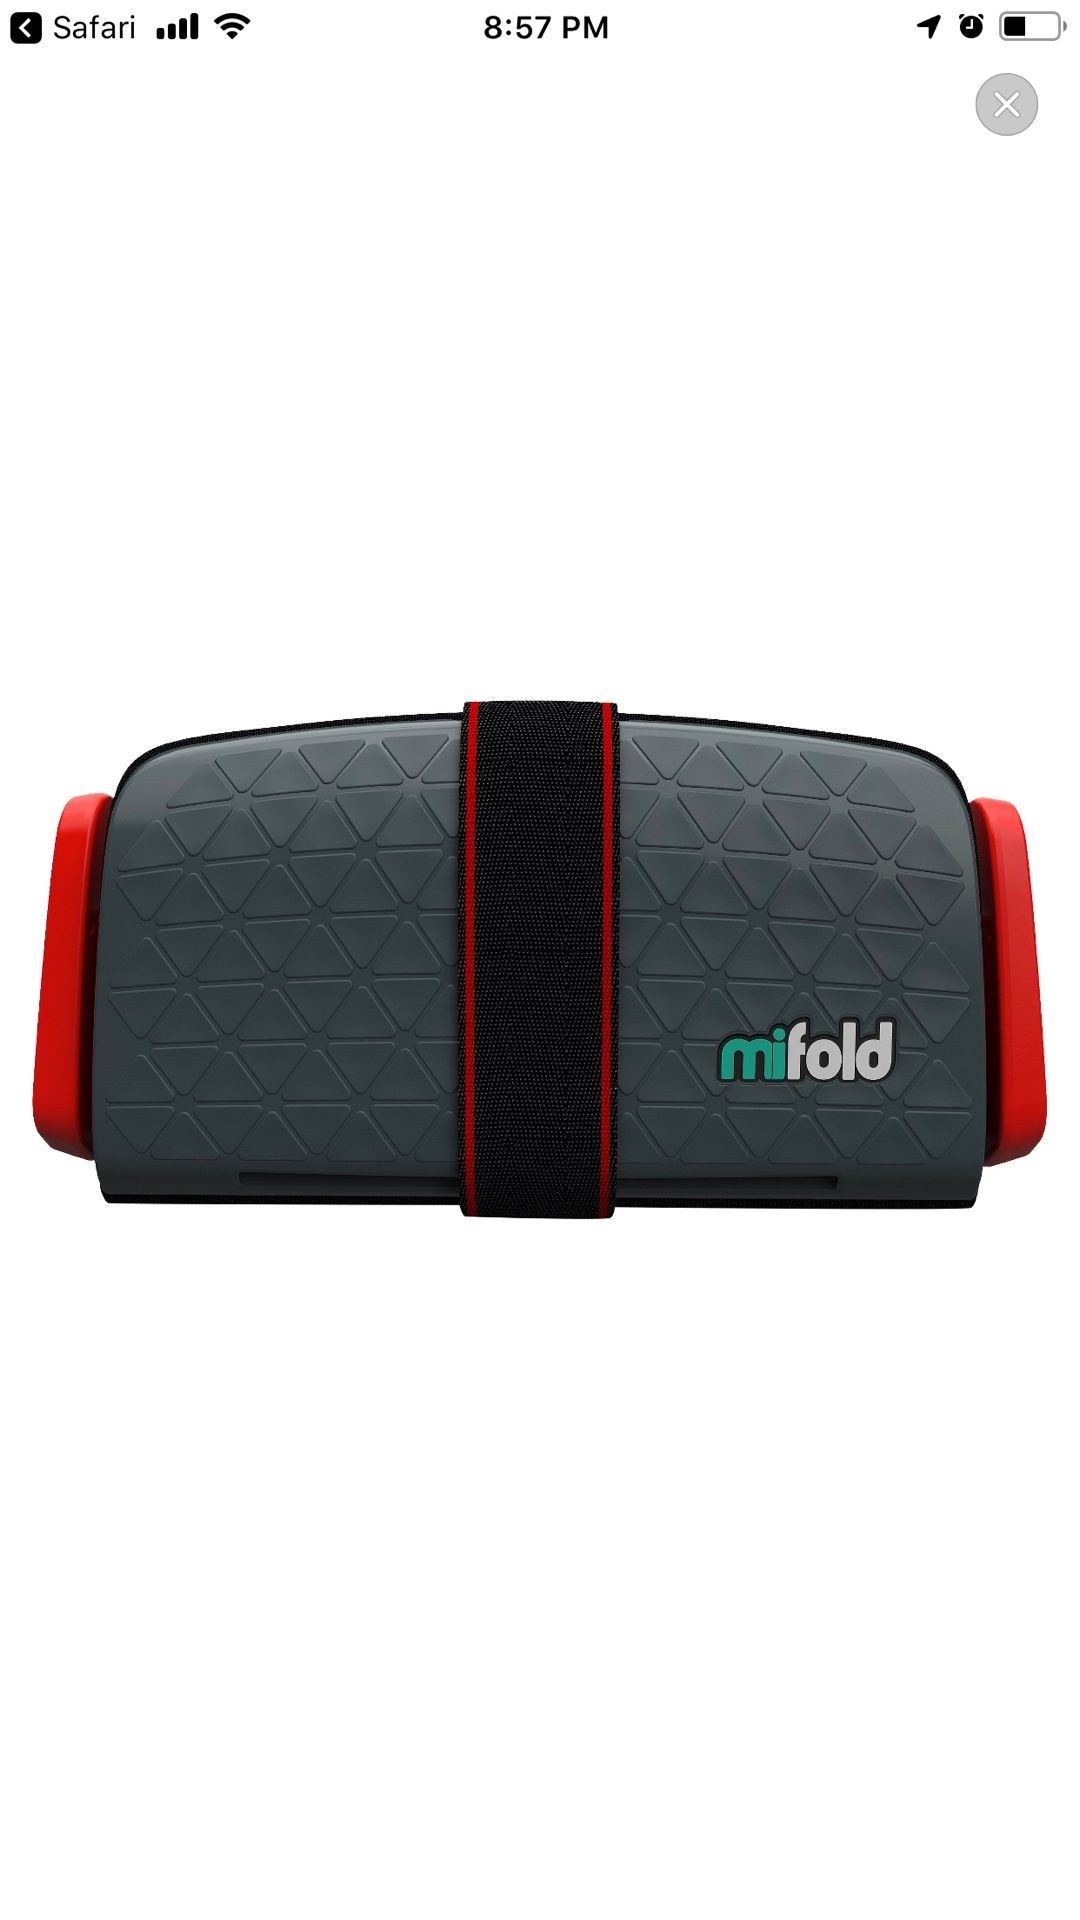 Mifold booster seat like new